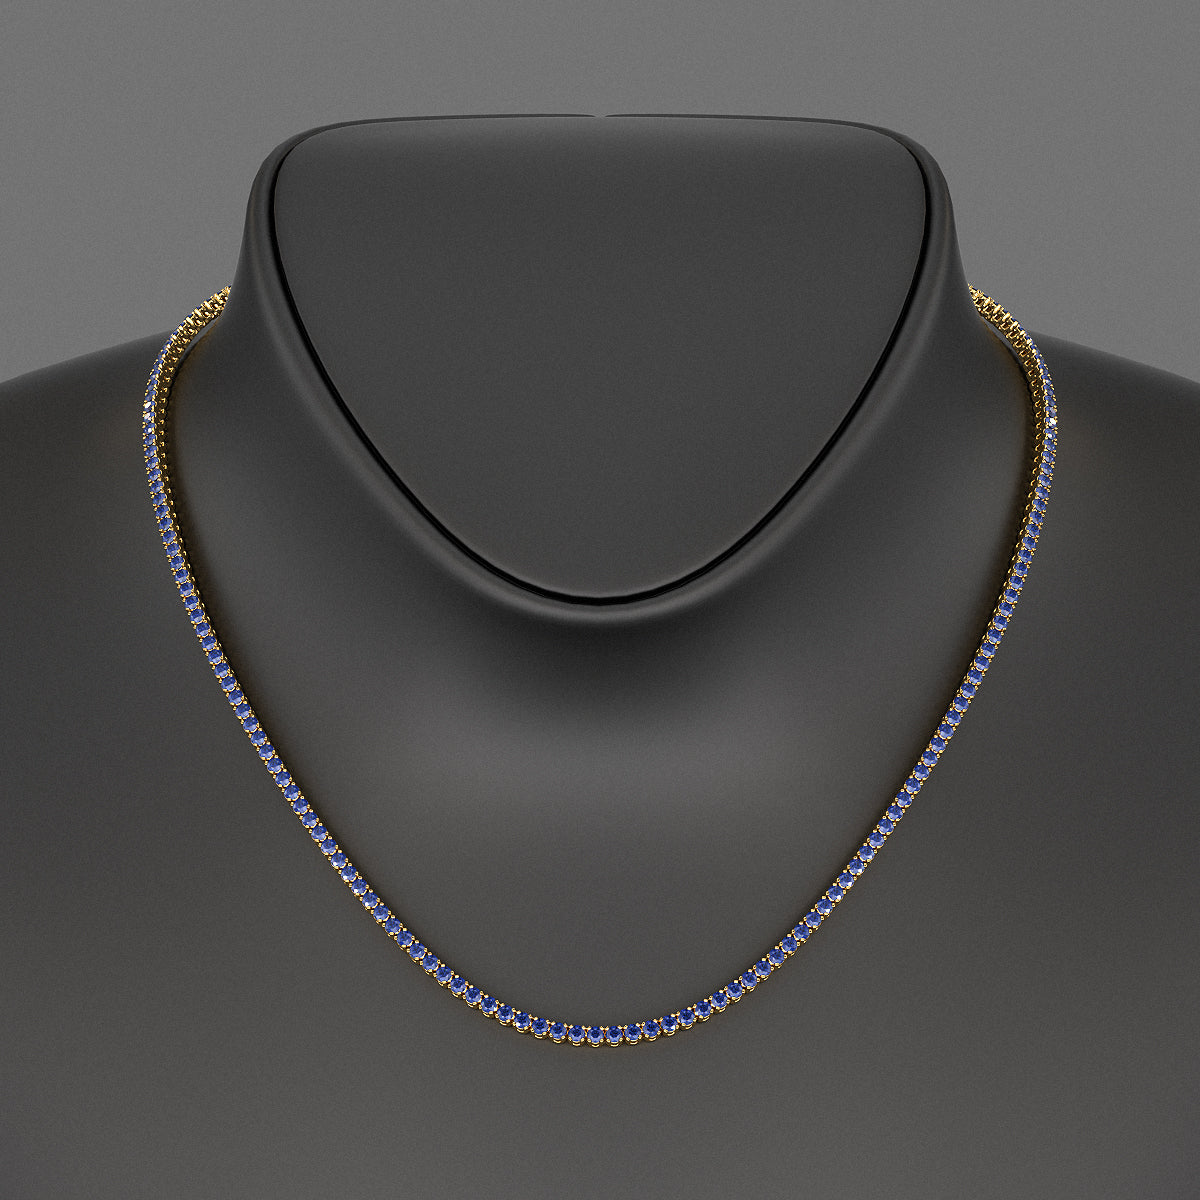 Natural Blue Sapphire Tennis Necklace in 14K/18K White Gold